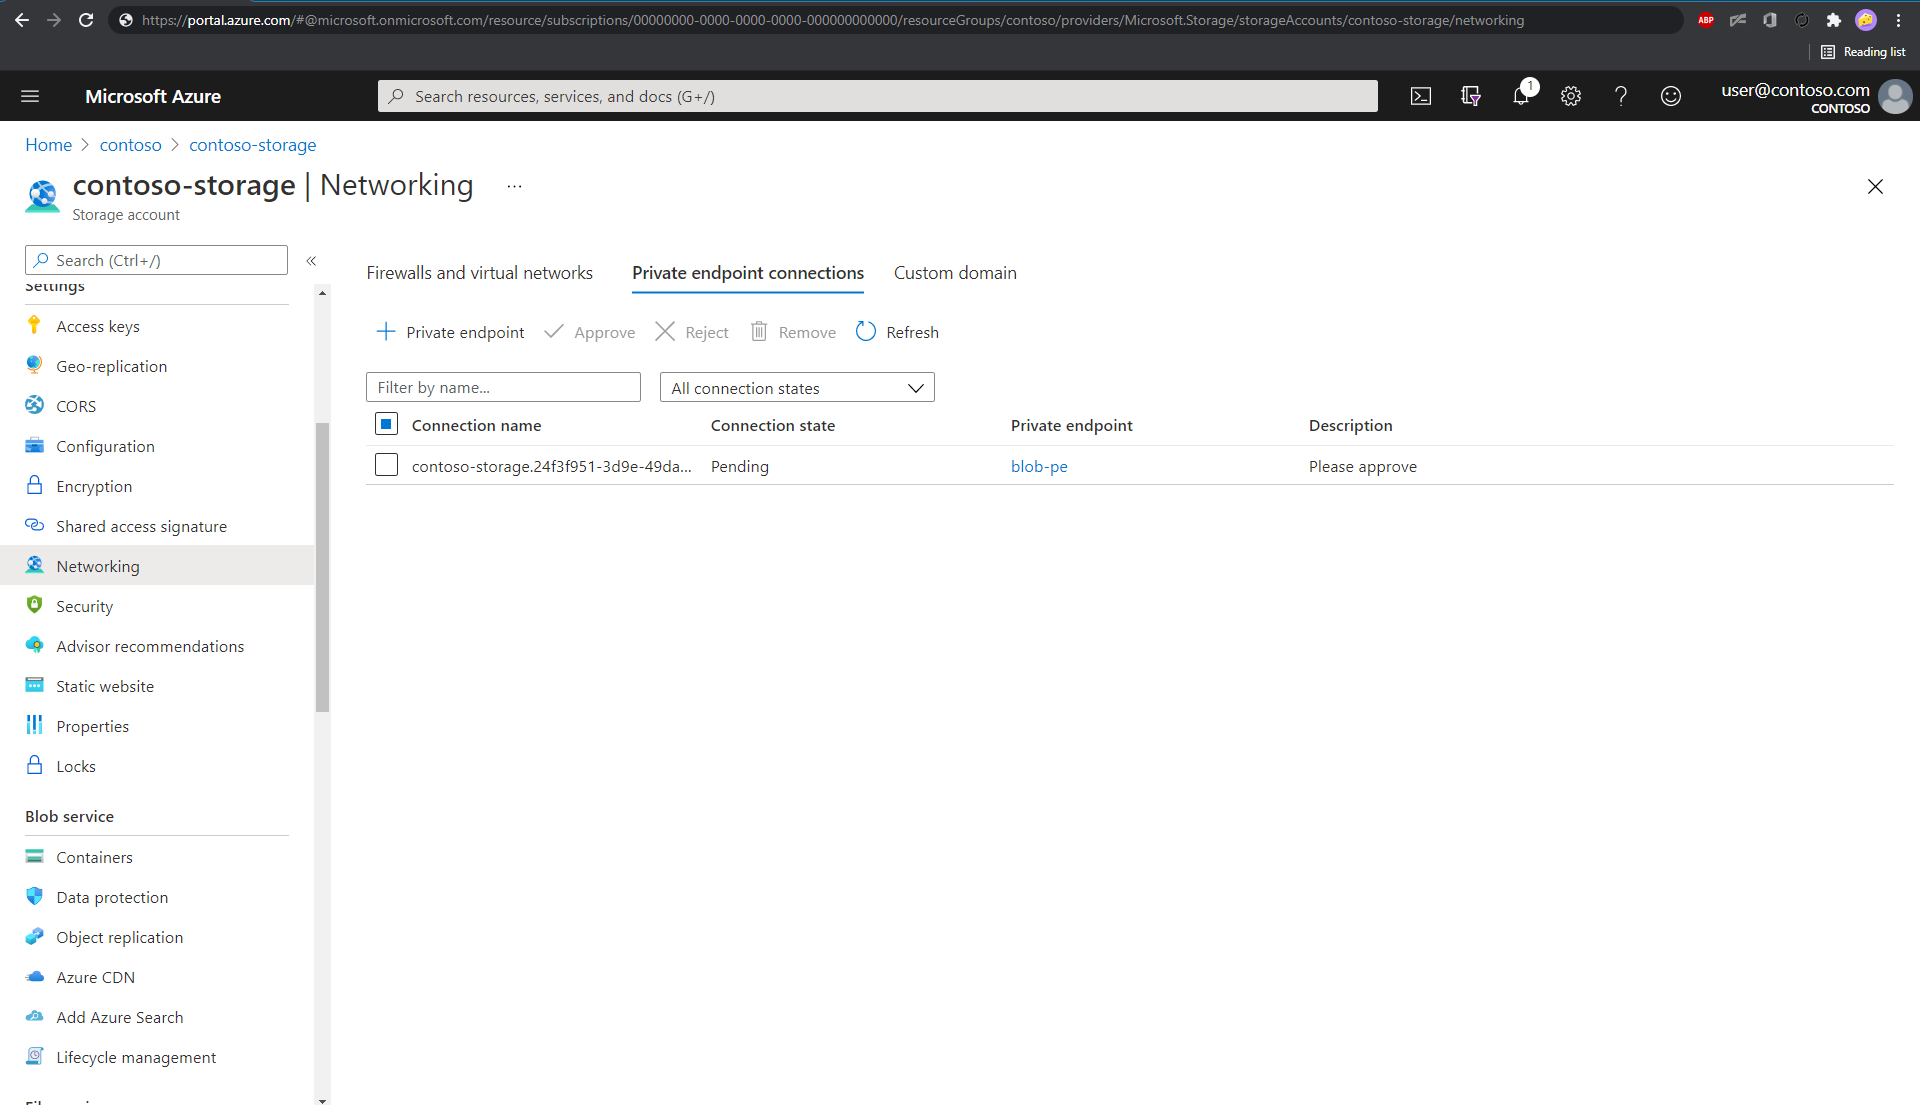 Screenshot of the Azure portal, showing the "Private endpoint connections" pane.